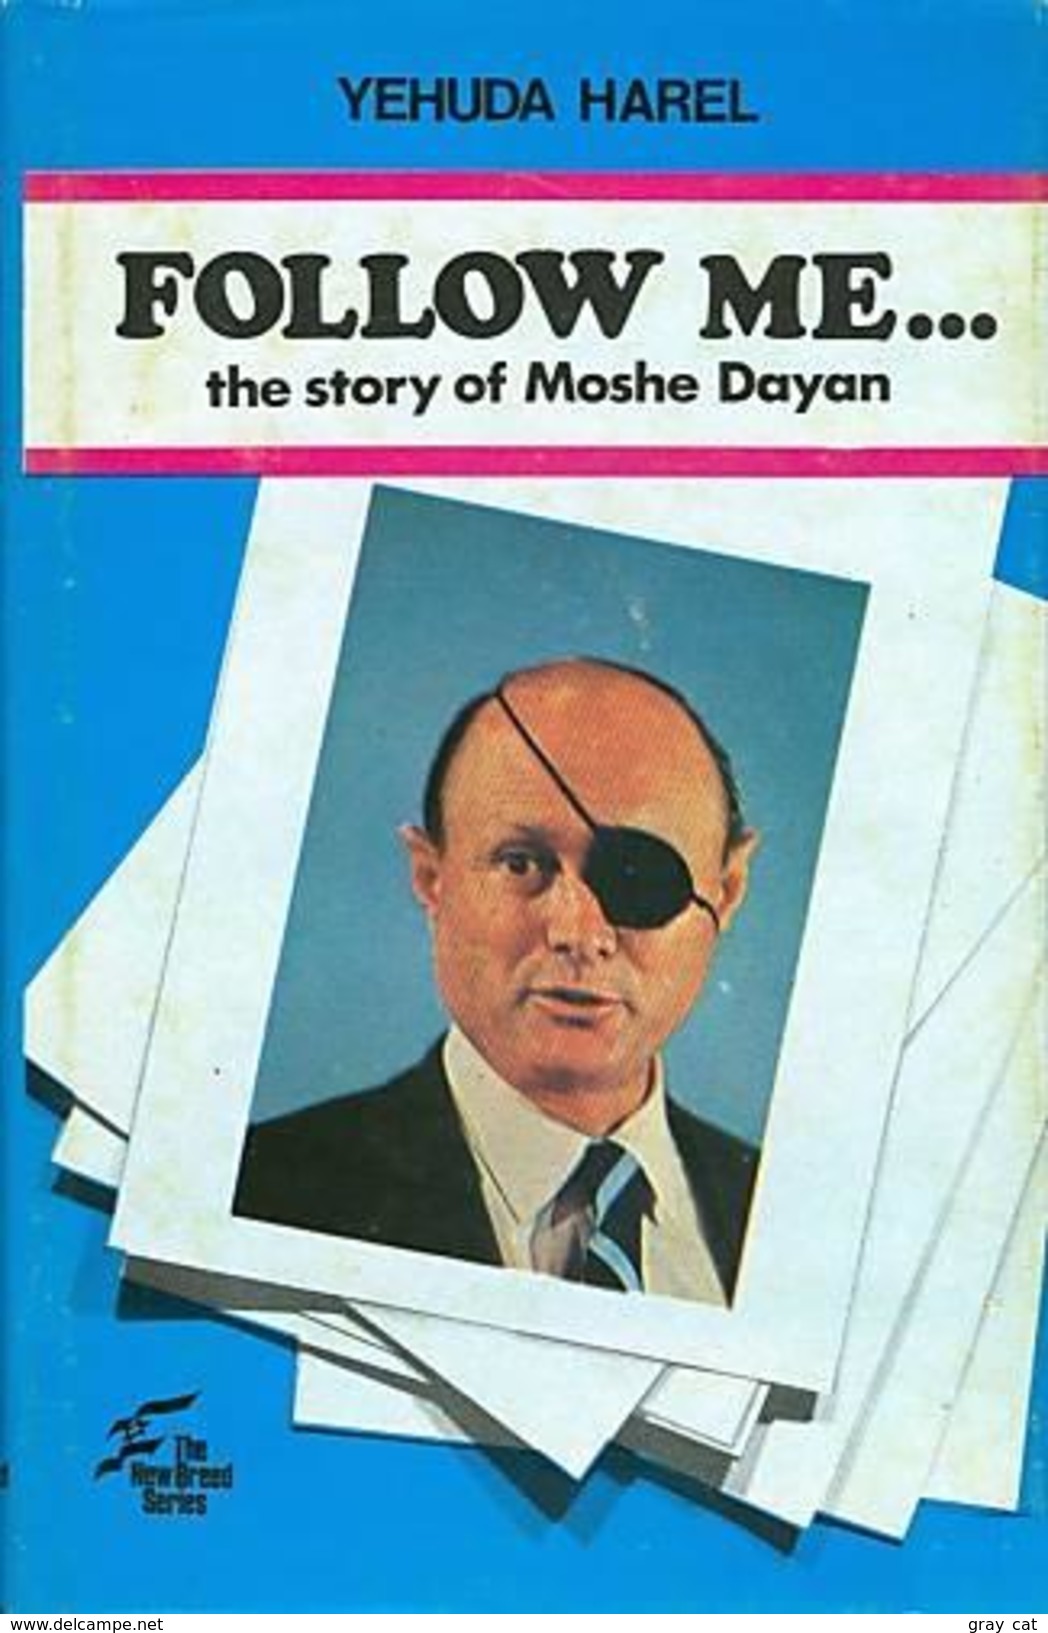 Follow Me: The Story Of Moshe Dayan By Yehuda Harel - Moyen Orient